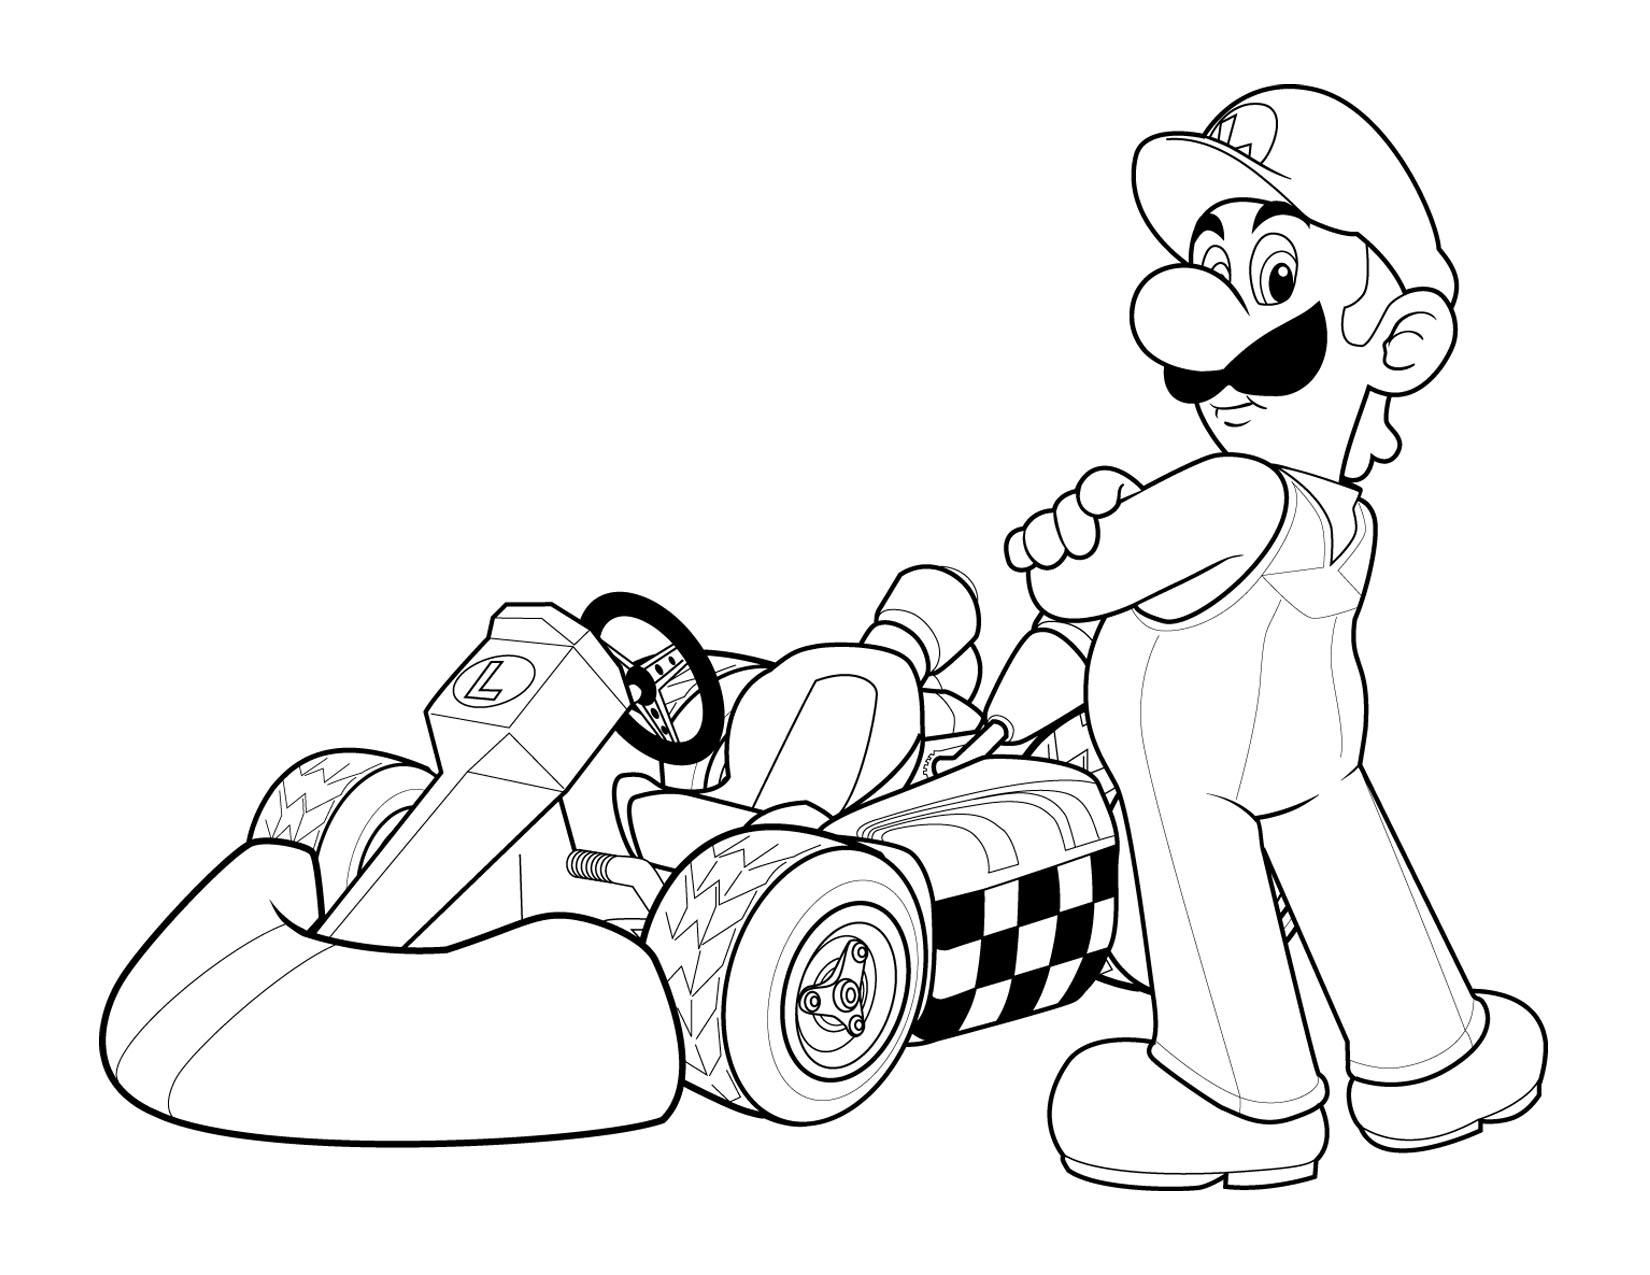 Blue Yoshi Coloring Pages To Print - Coloring Pages For All Ages